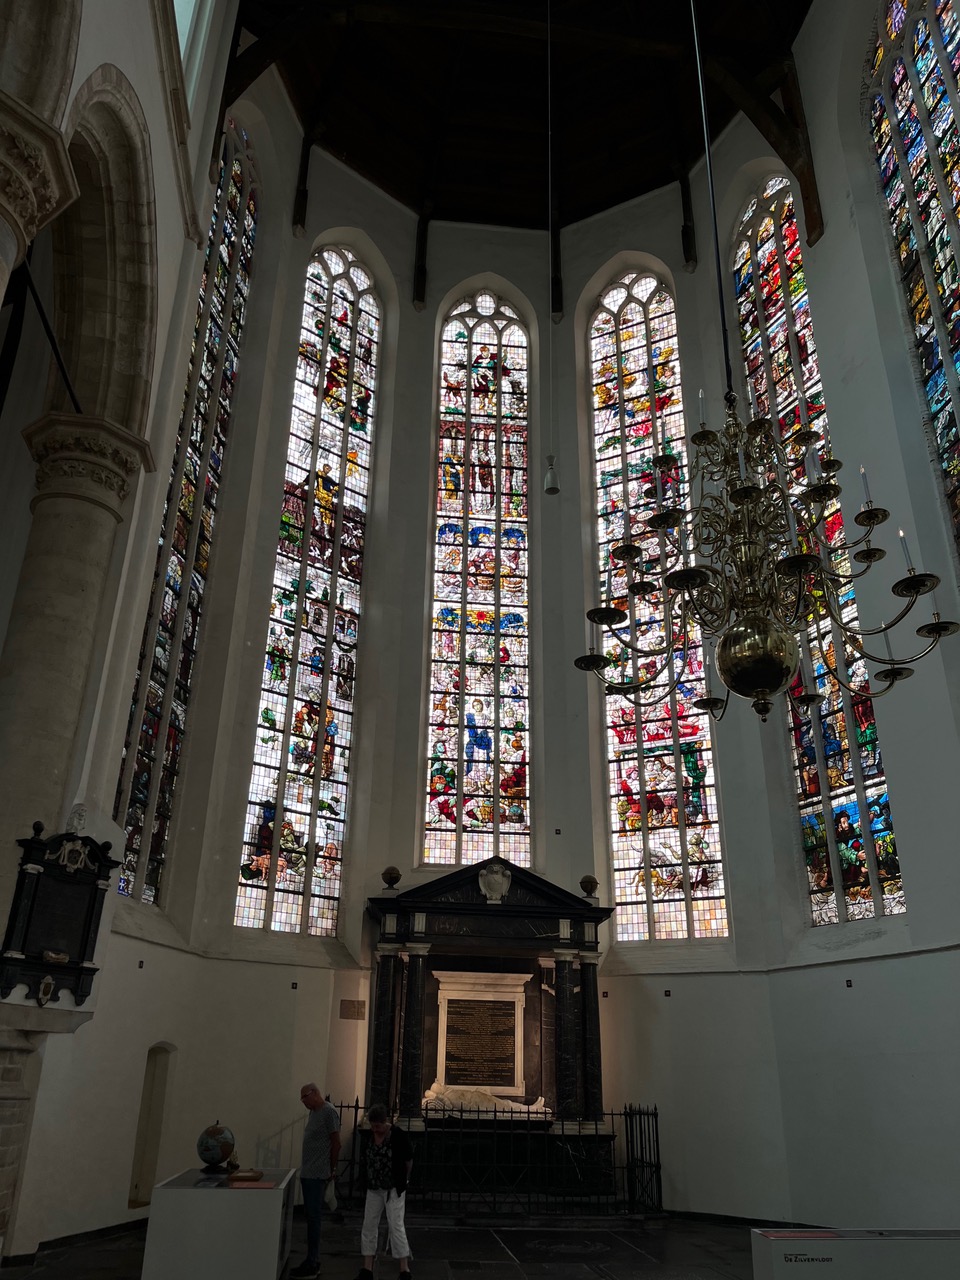 stained glass windows of the old church of Delft